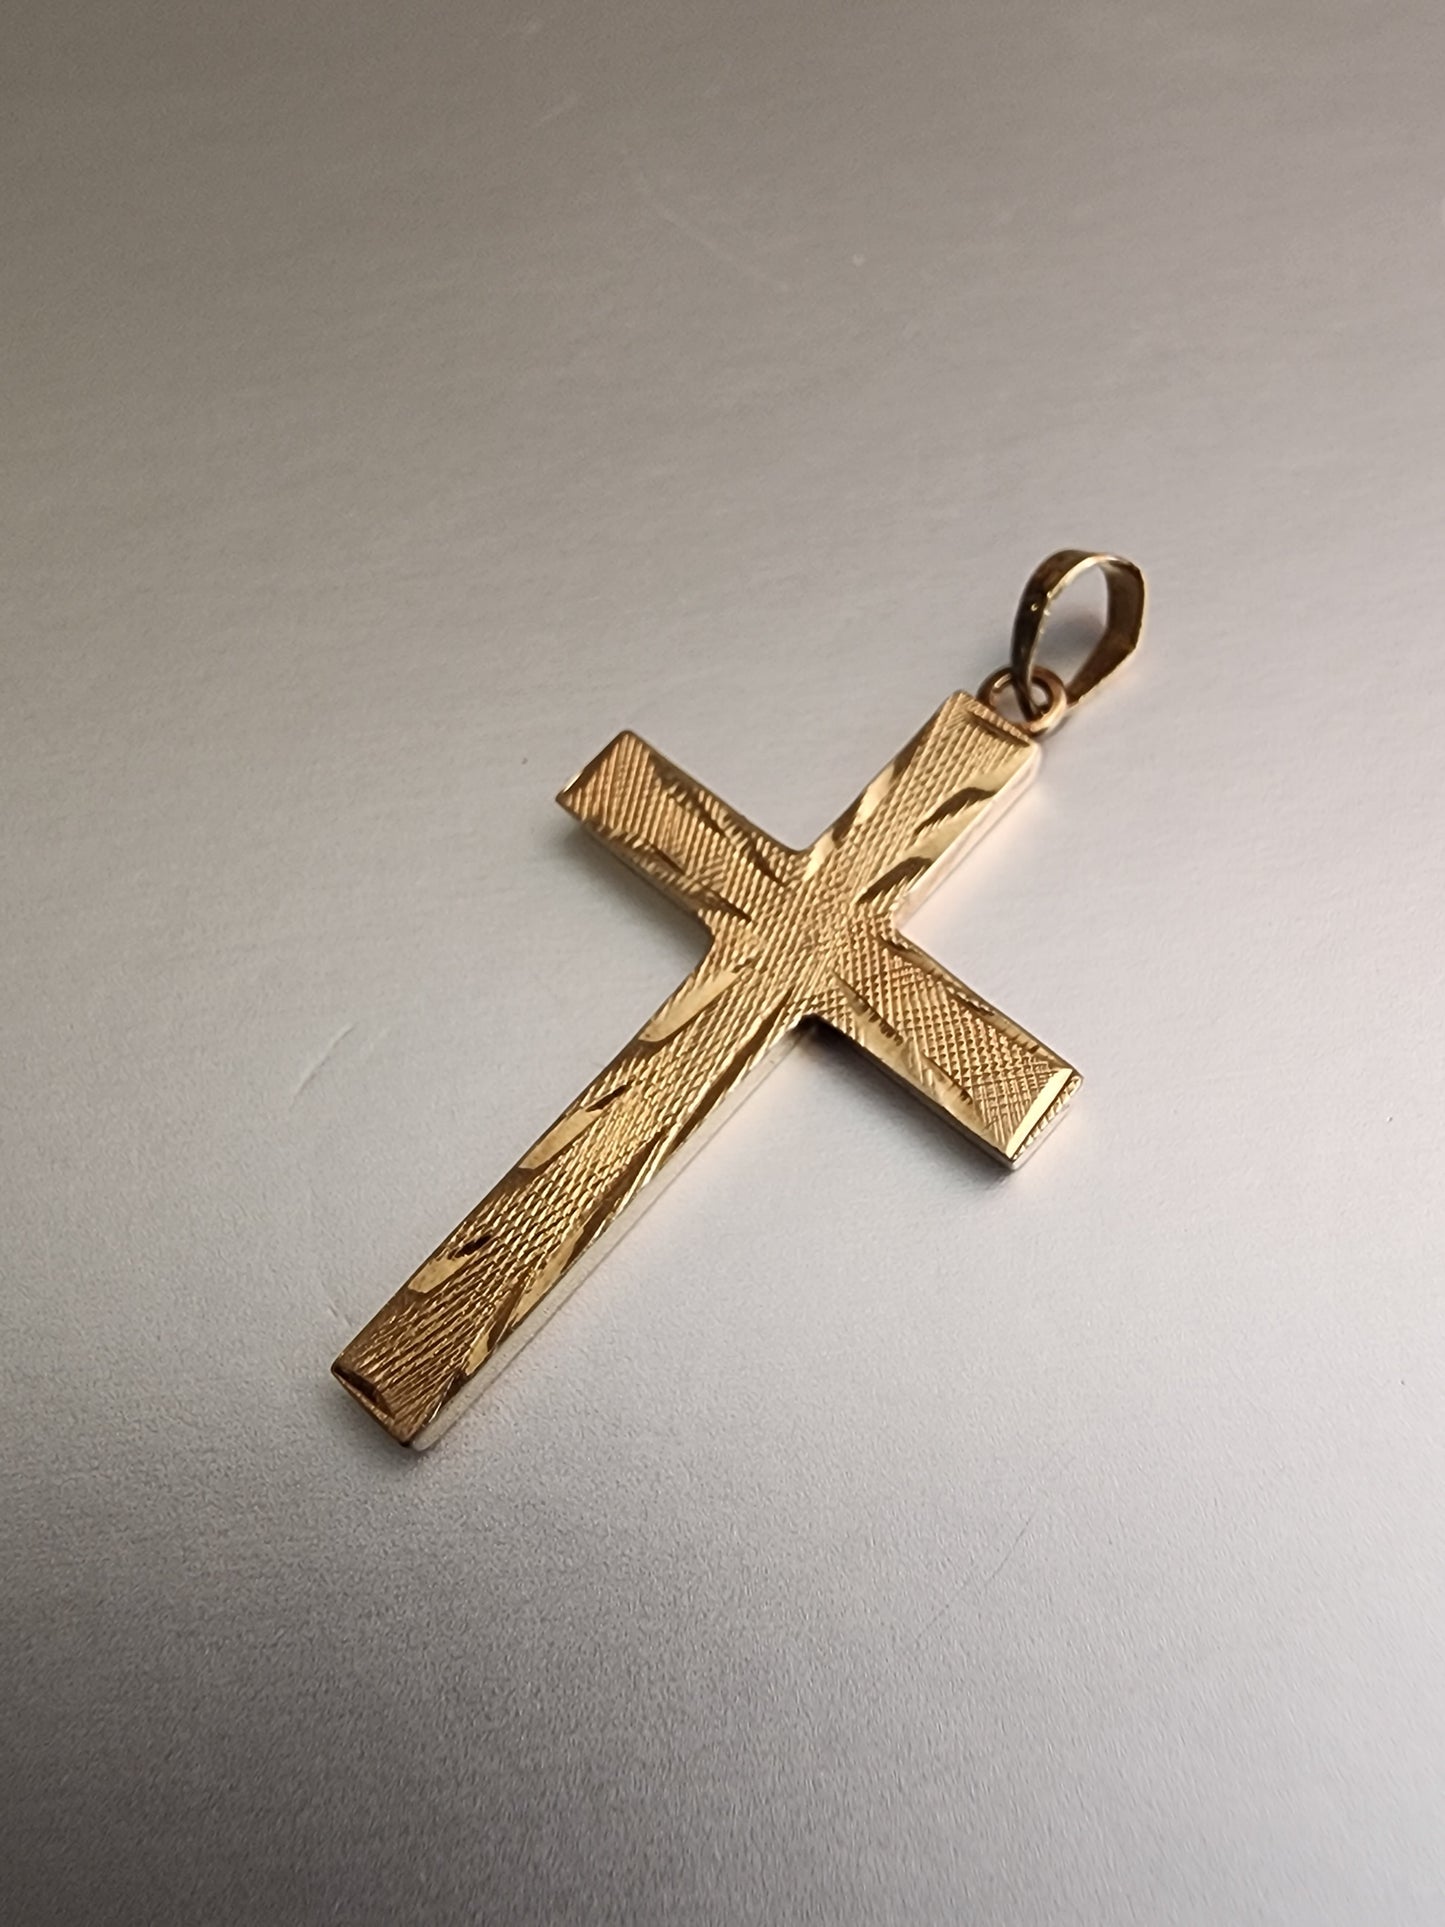 14KT YG CROSS PENDANT MEASURING APPROXIMATELY 31.5X15.5MM WITH ENGRAVED DEDSIGN